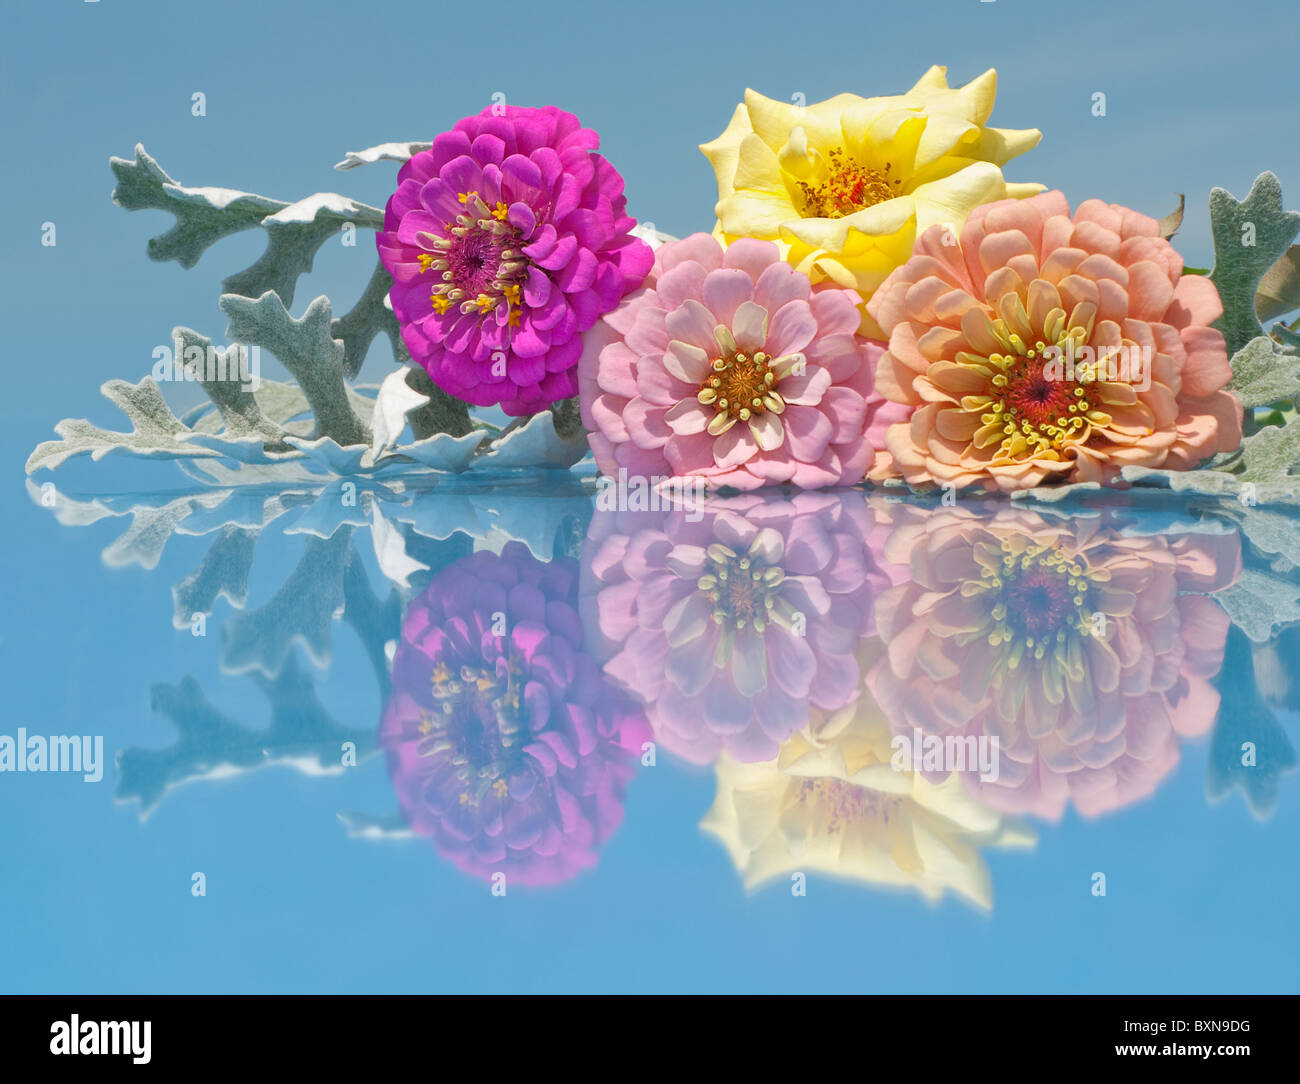 Pink Zinnias and a rose in different colors against blue sky with reflection Stock Photo